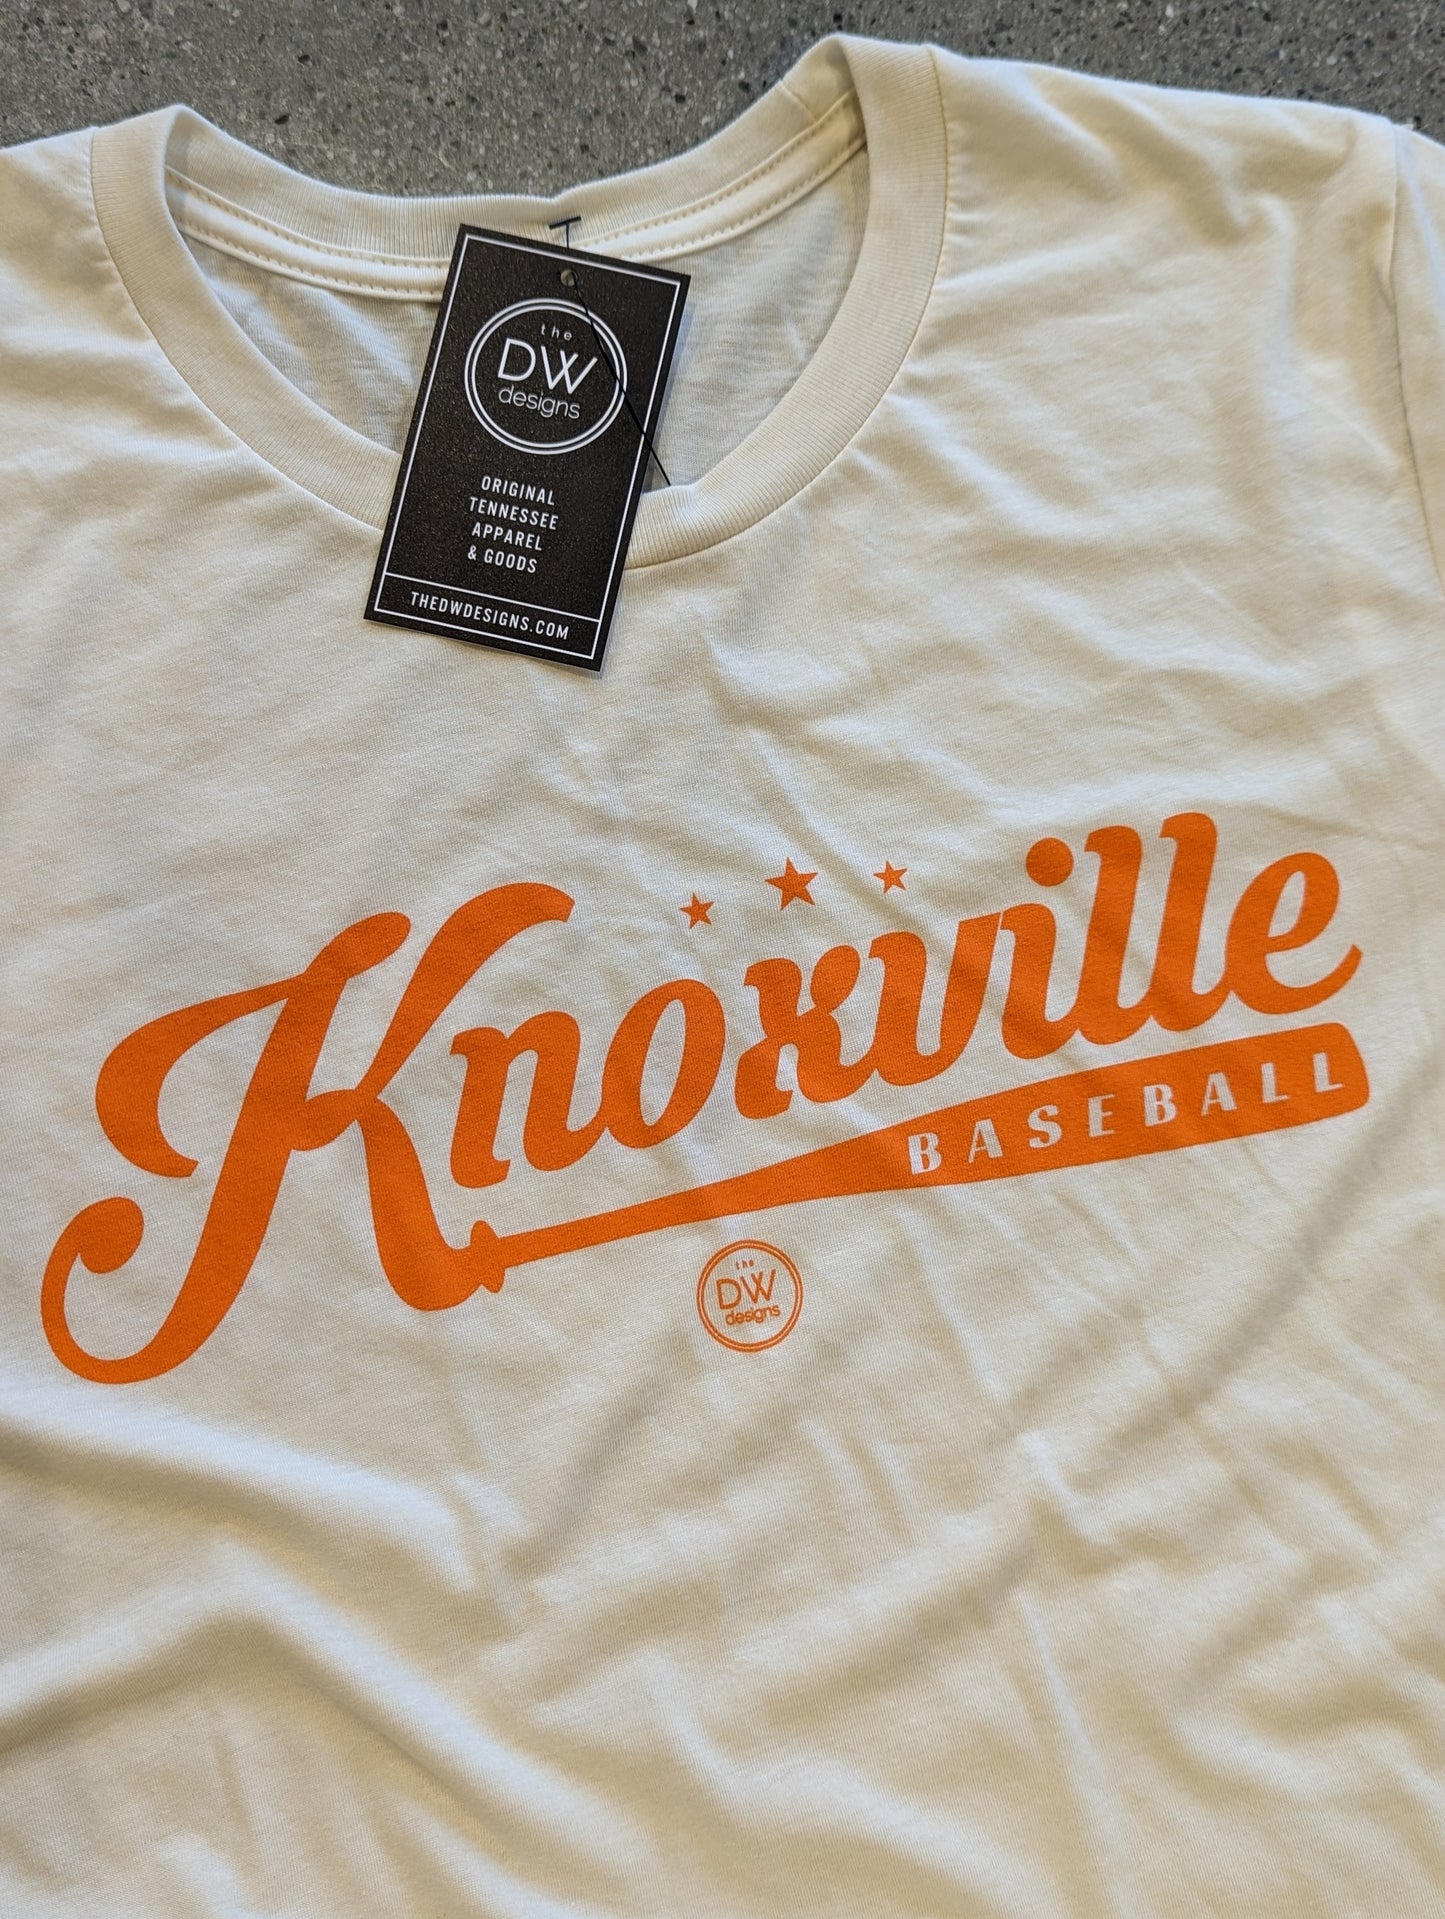 The Knoxville Baseball Tee